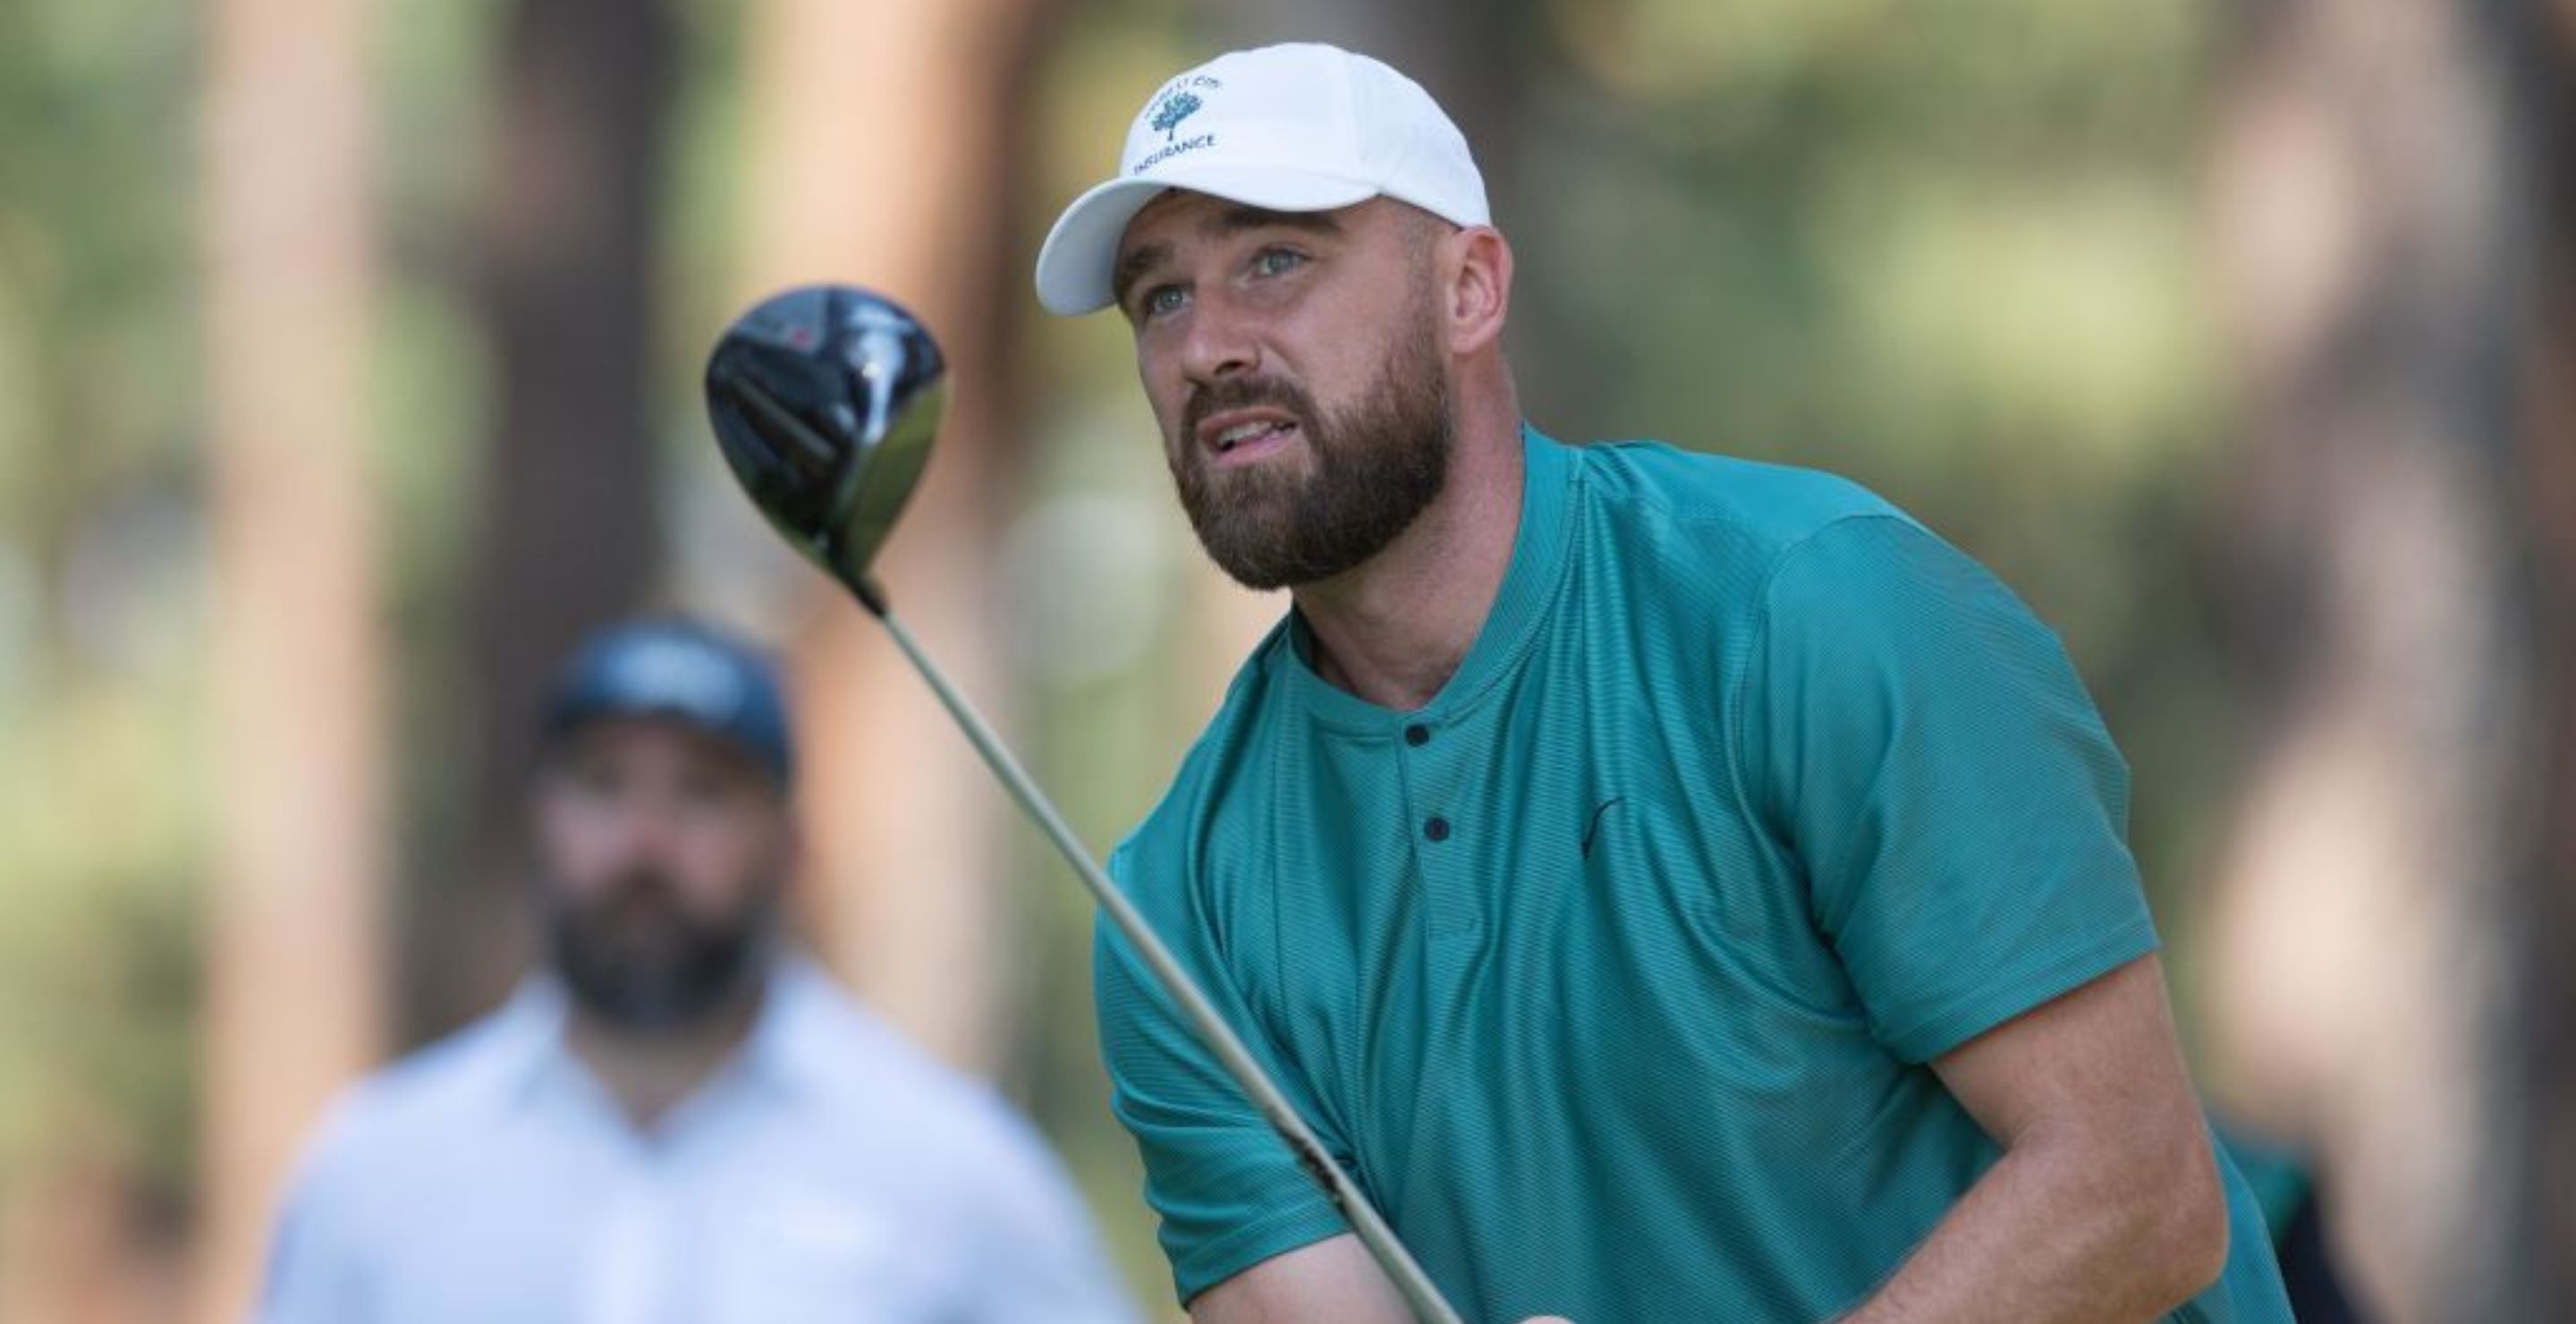 Travis Kelce Confronts Heckler While Golfing About Taylor Swift